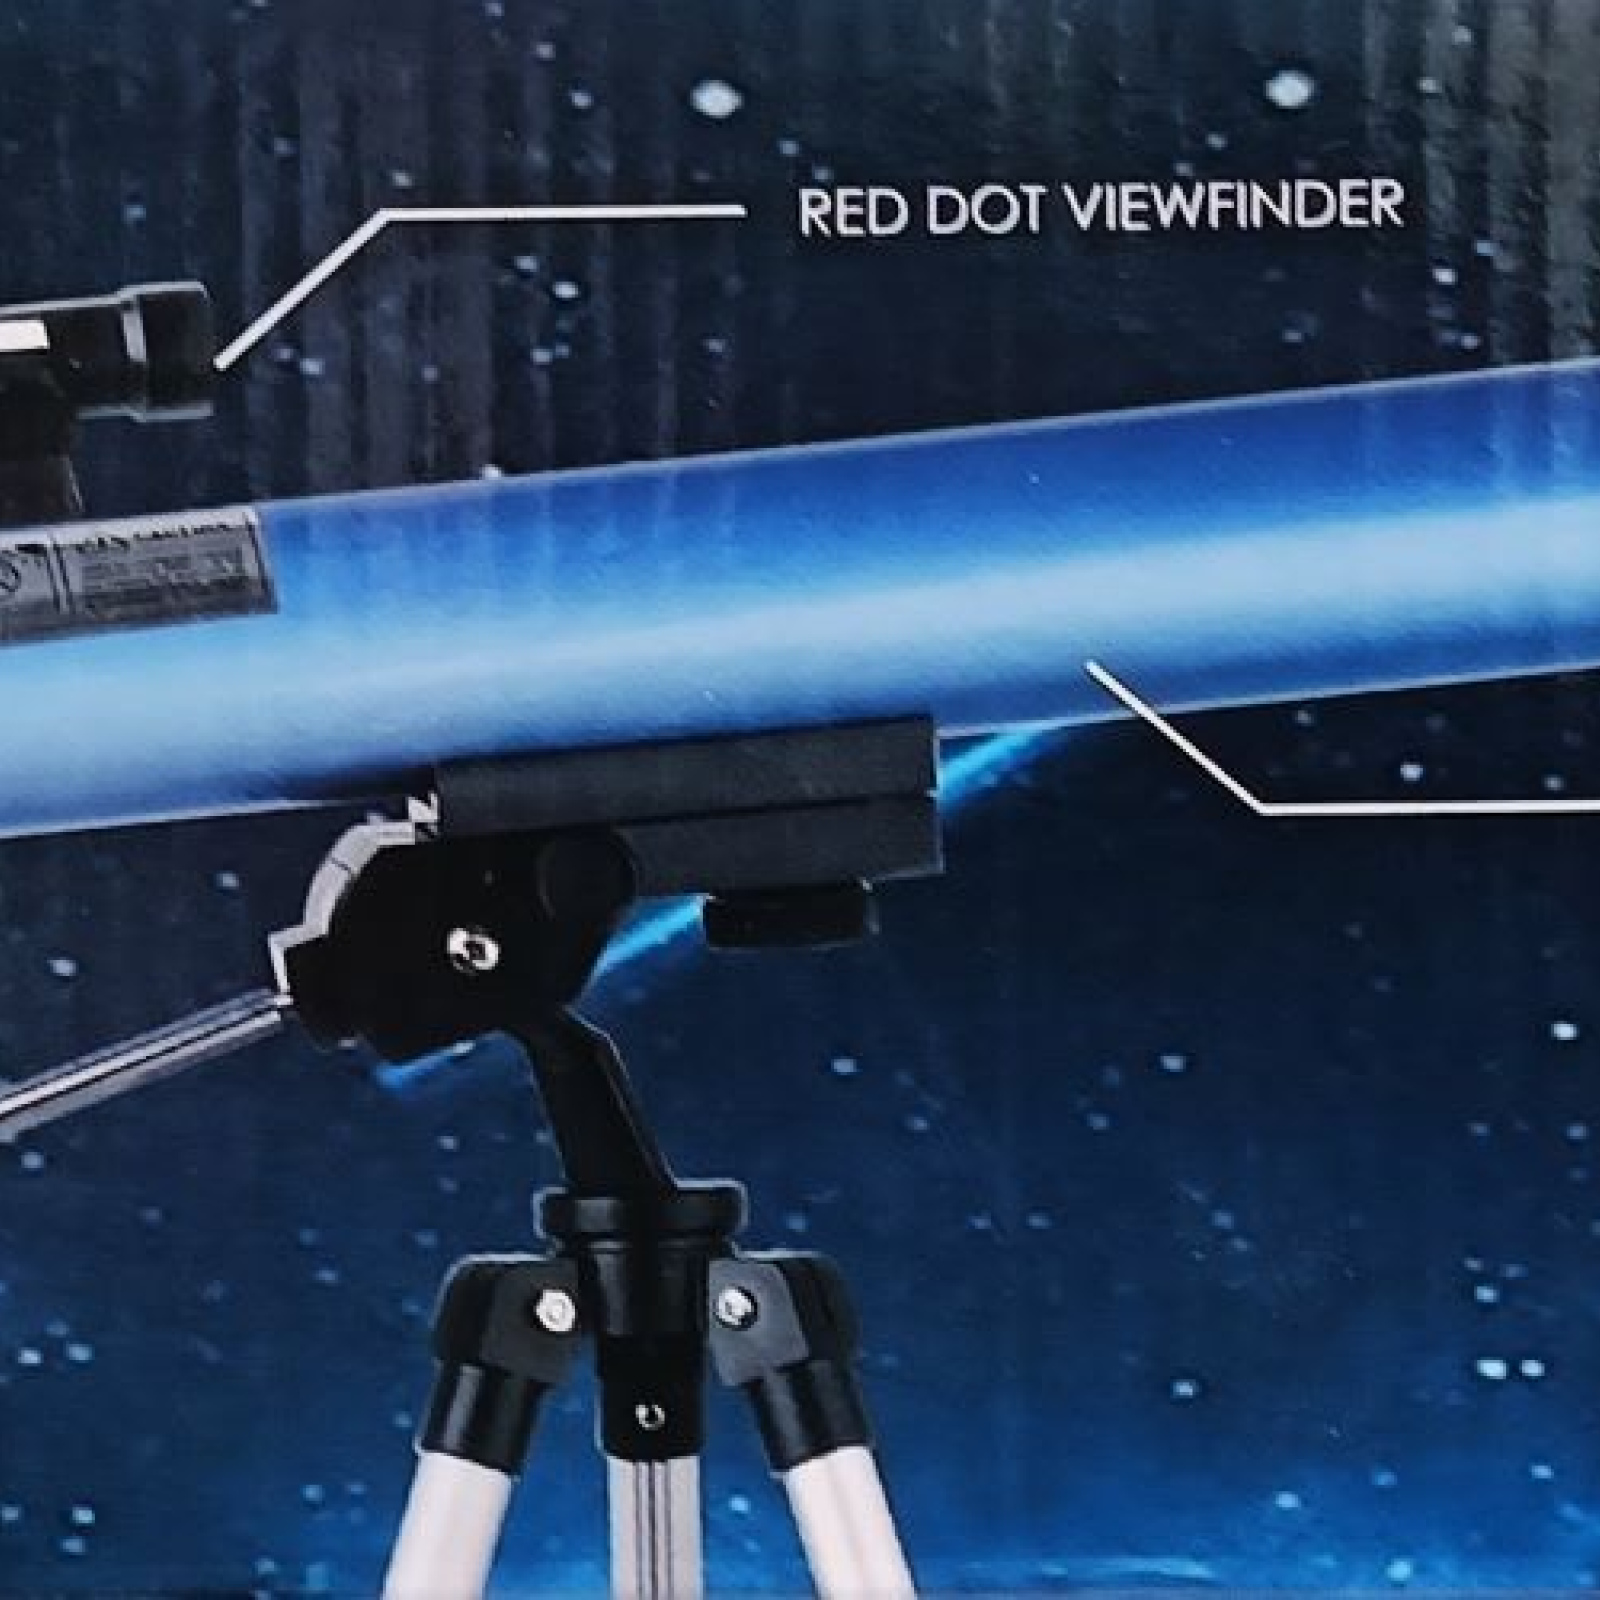 60/700 mm, astronomical telescope,5 x 24 finder scope refractor, telescope for beginners, amateur astronomers